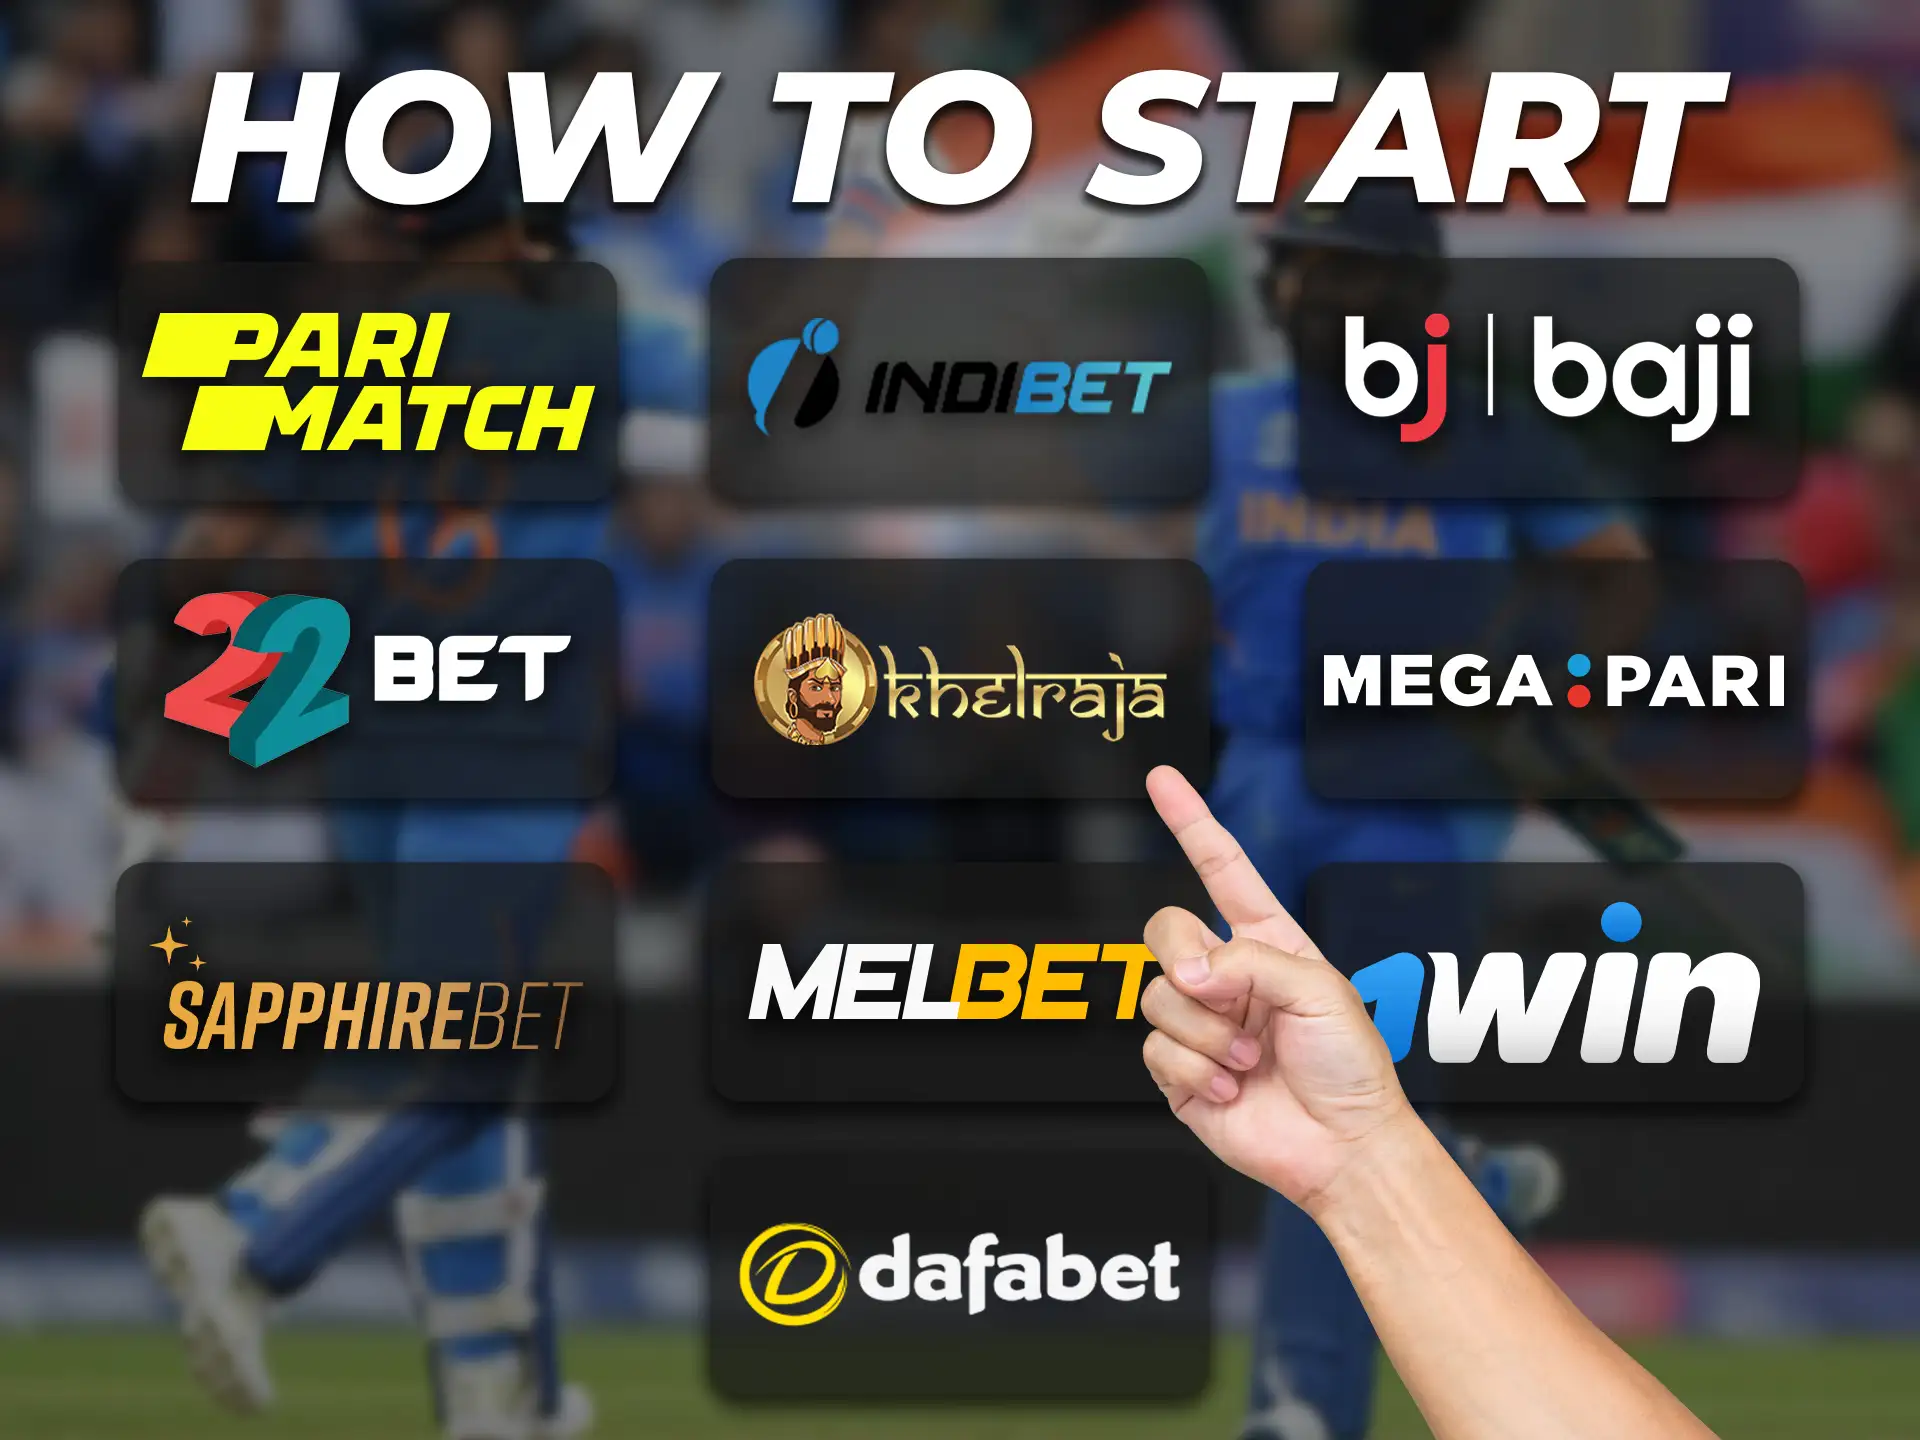 Choose one cricket betting site and follow the instructions to get started.